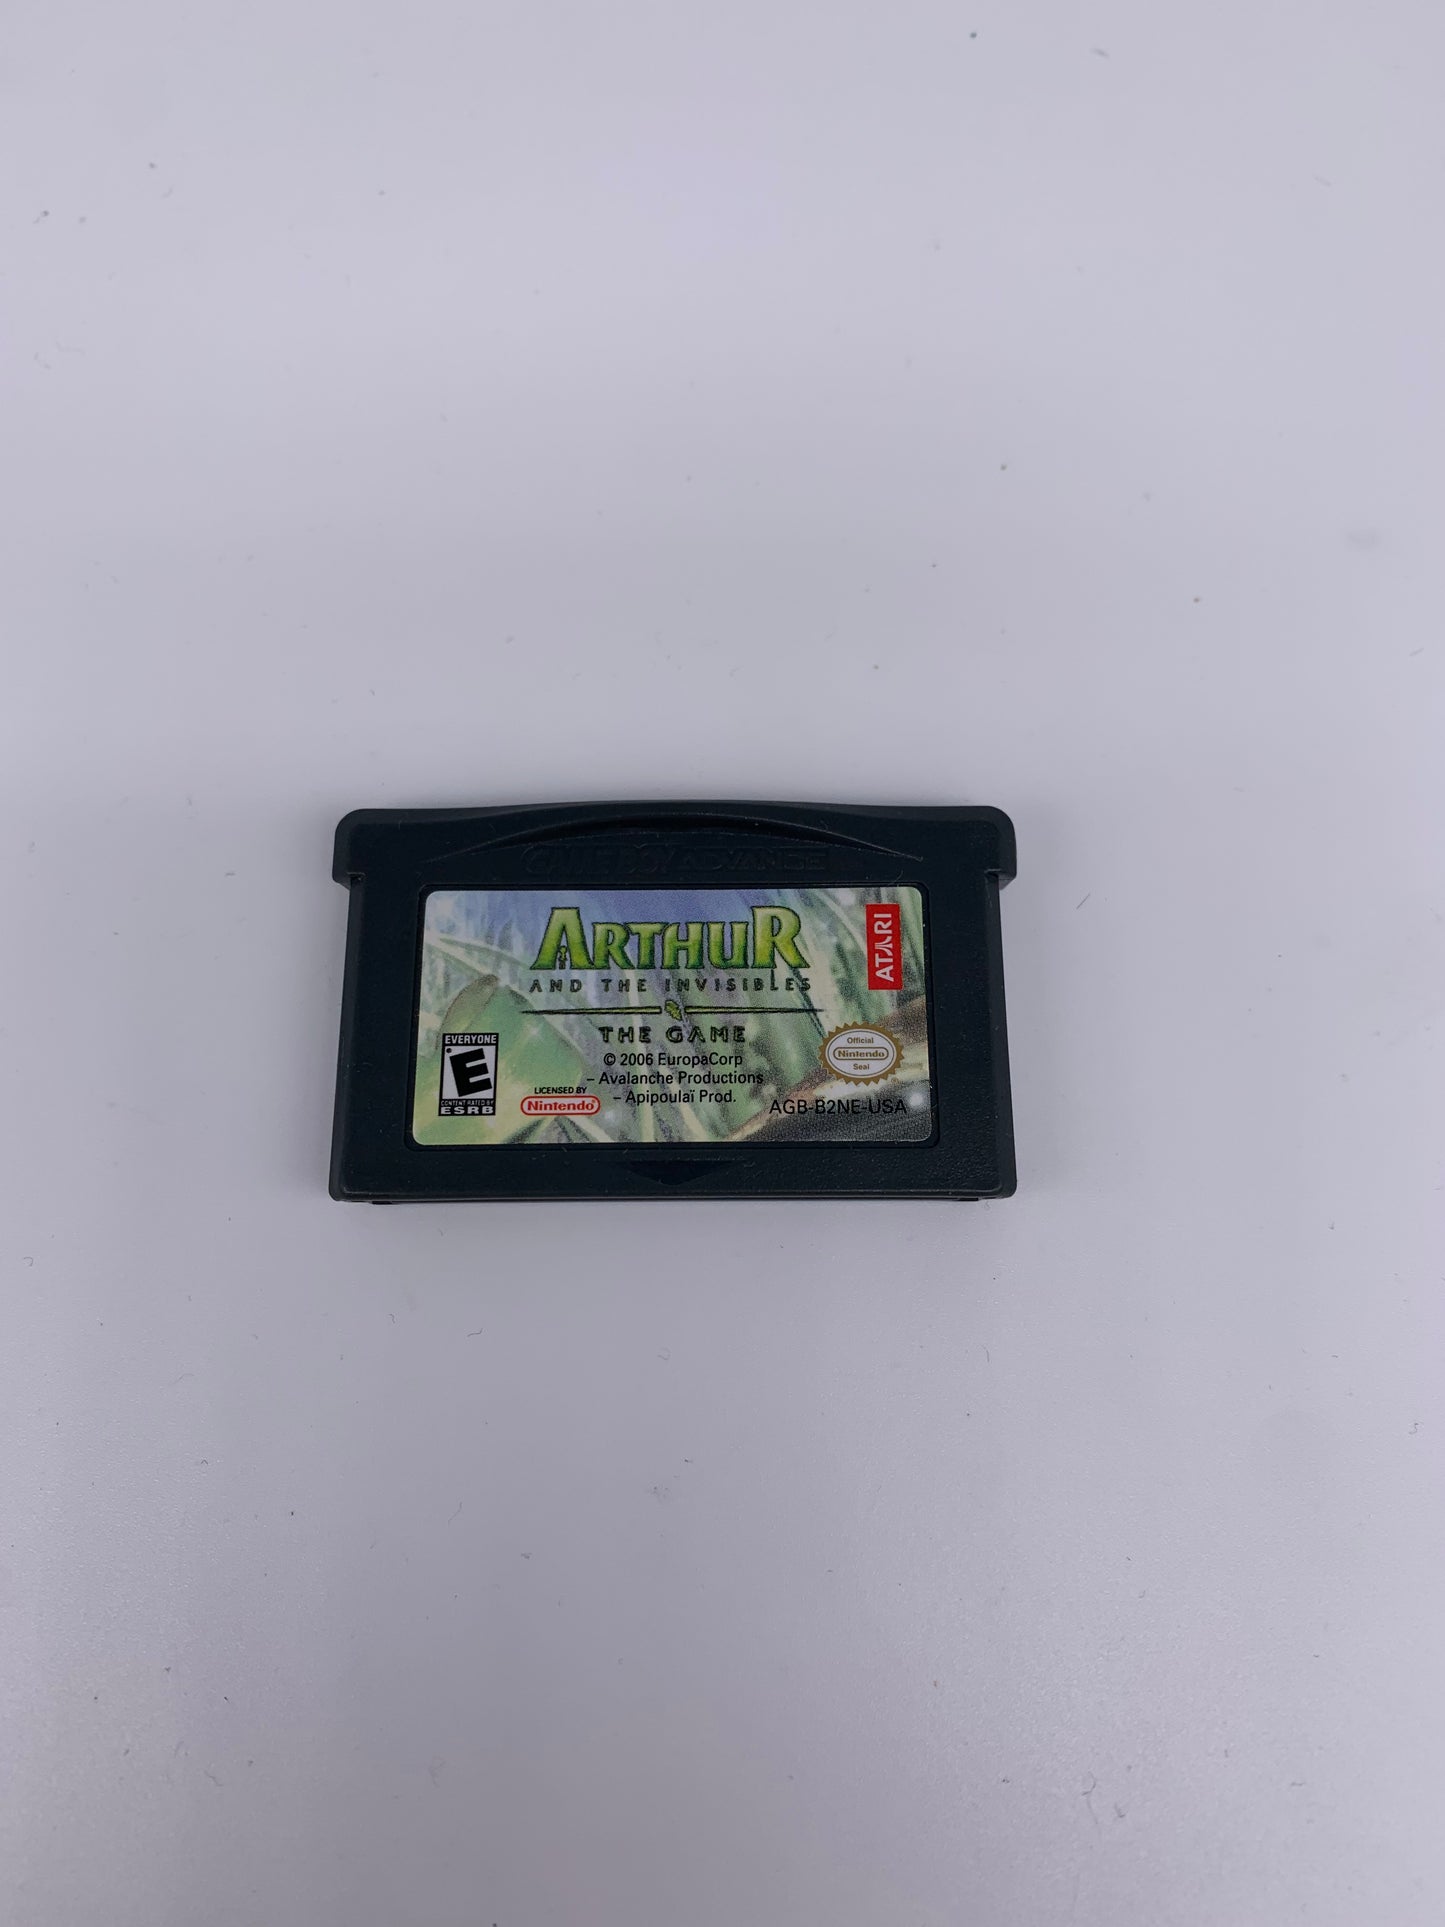 PiXEL-RETRO.COM : GAME BOY ADVANCE (GBA) GAME NTSC ARTHUR AND THE iNViSiBLES THE GAME